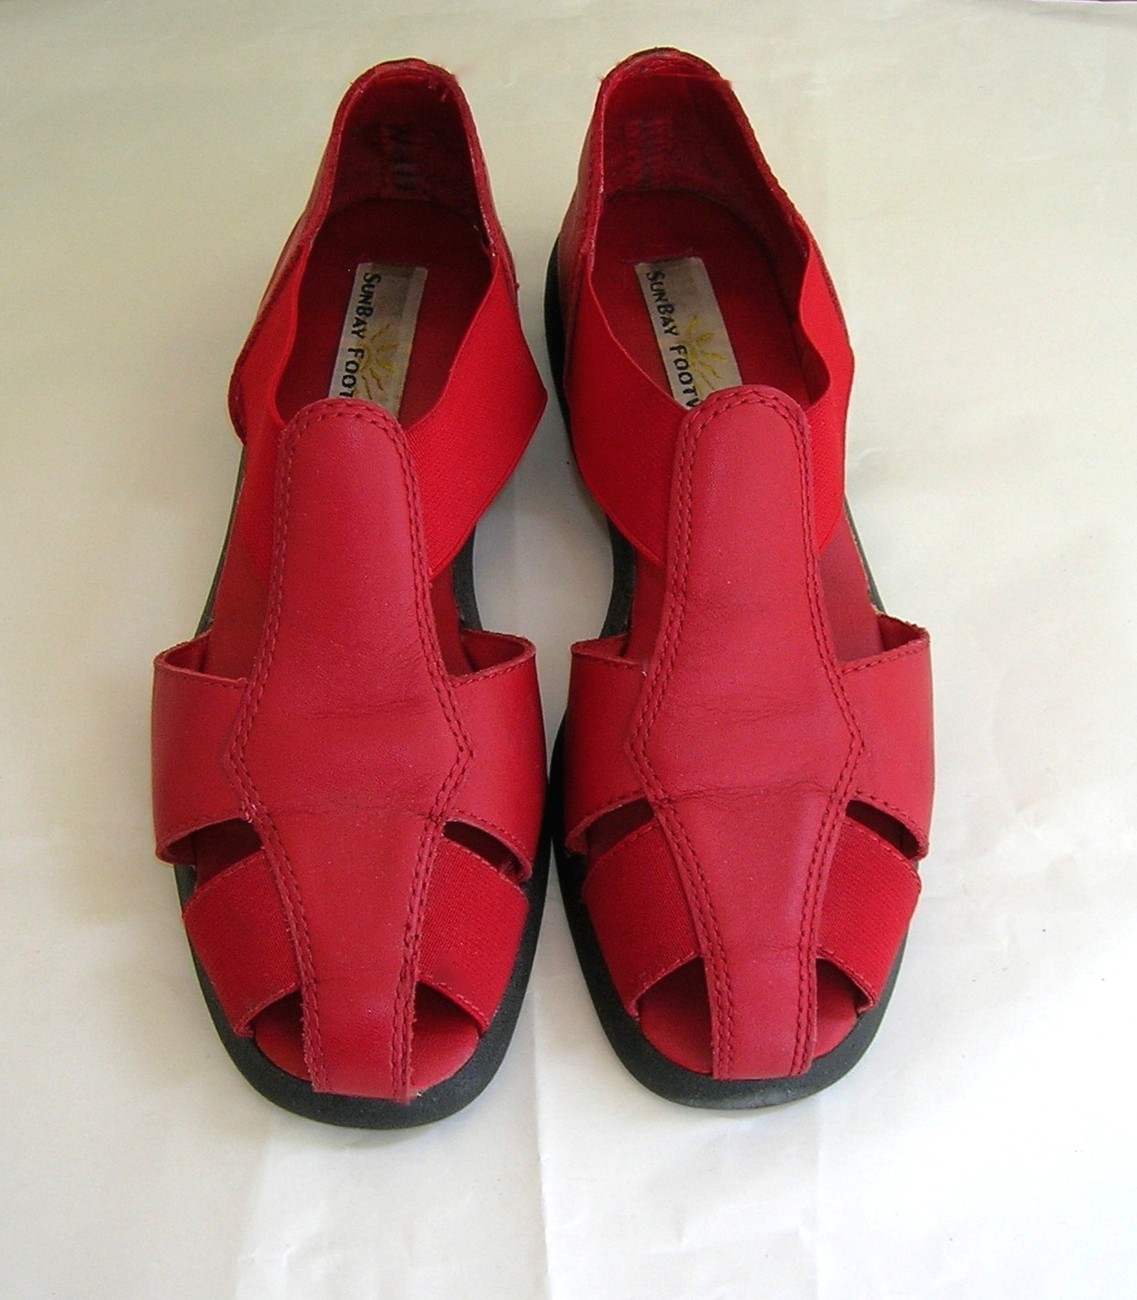 Red Leather Sunbay Fisherman Shoes sz. 7B - Flats & Oxfords